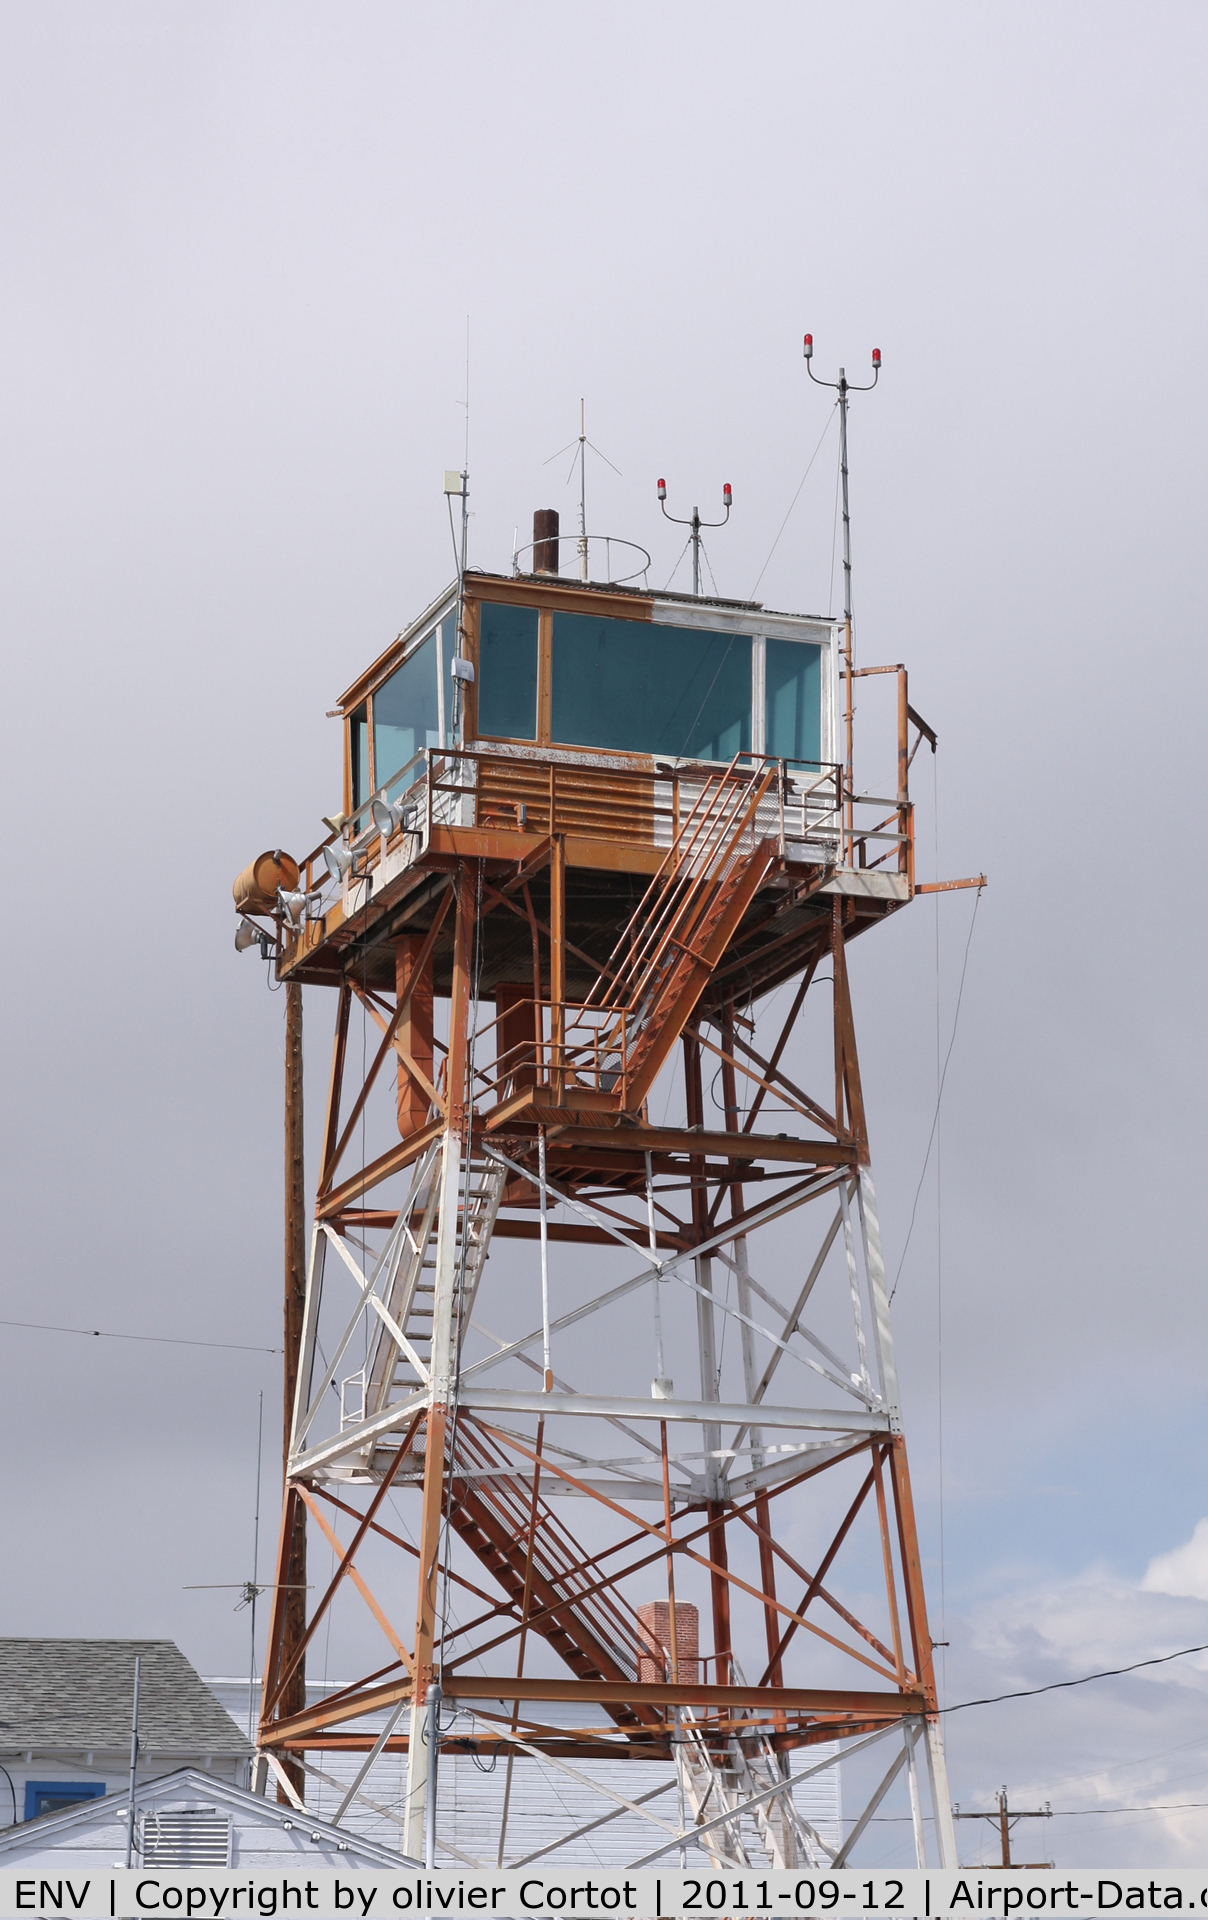 Wendover Airport (ENV) - the control tower is a WWII heritage